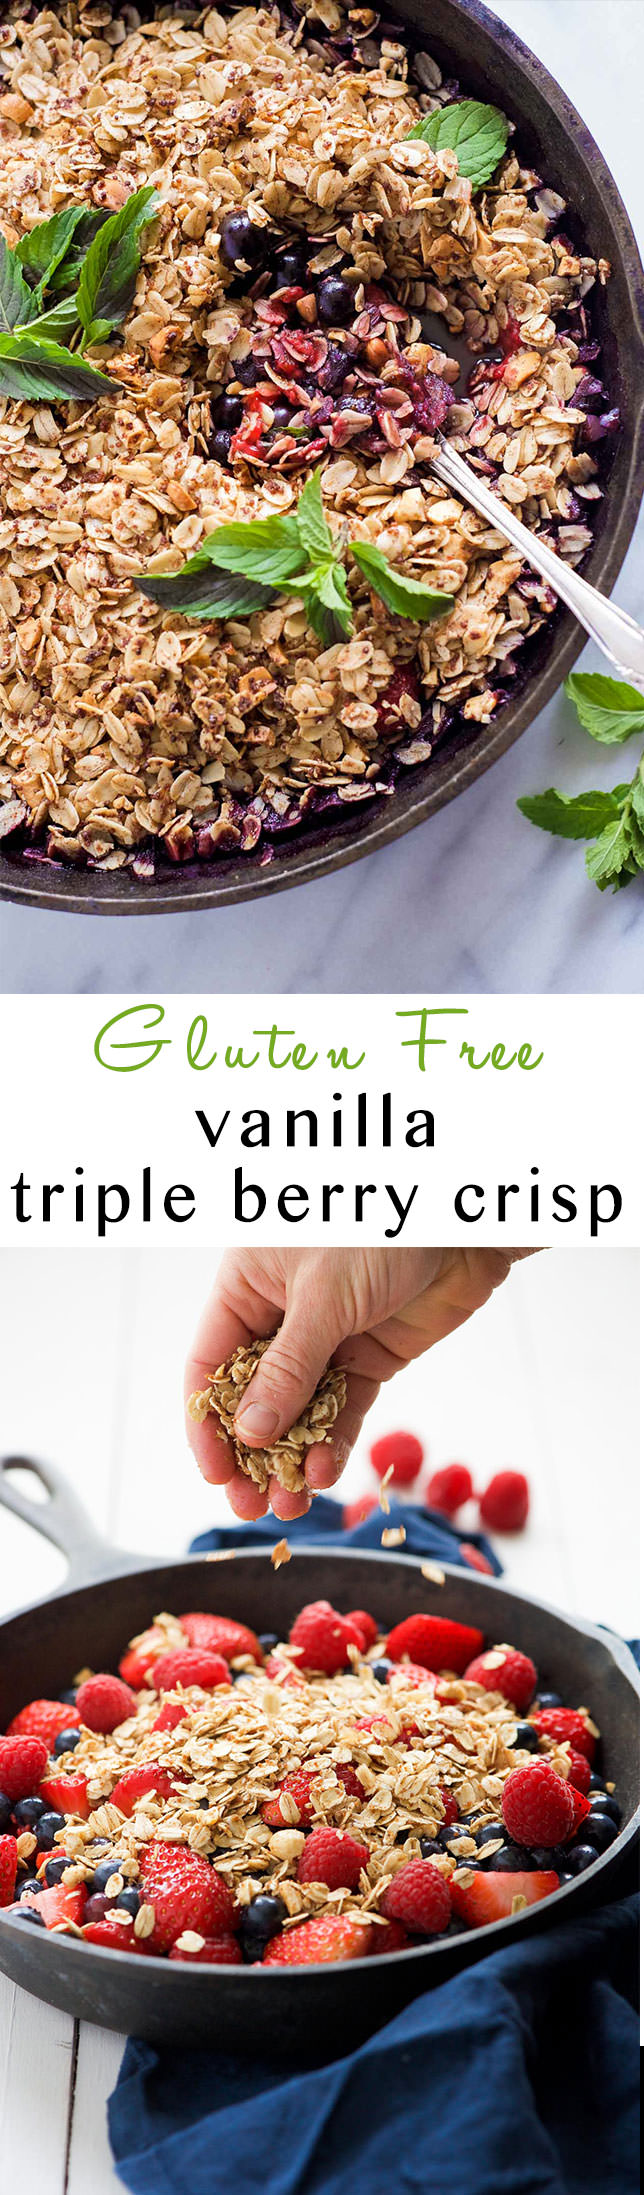 Gluten Free Vanilla Triple Berry Crisp is a simple 8 ingredient dessert that is bursting with fresh berries that bake into a juicy sauce; then topped with a sugary oatmeal topping. A gluten free and vegan dessert that is healthy enough for a breakfast treat!